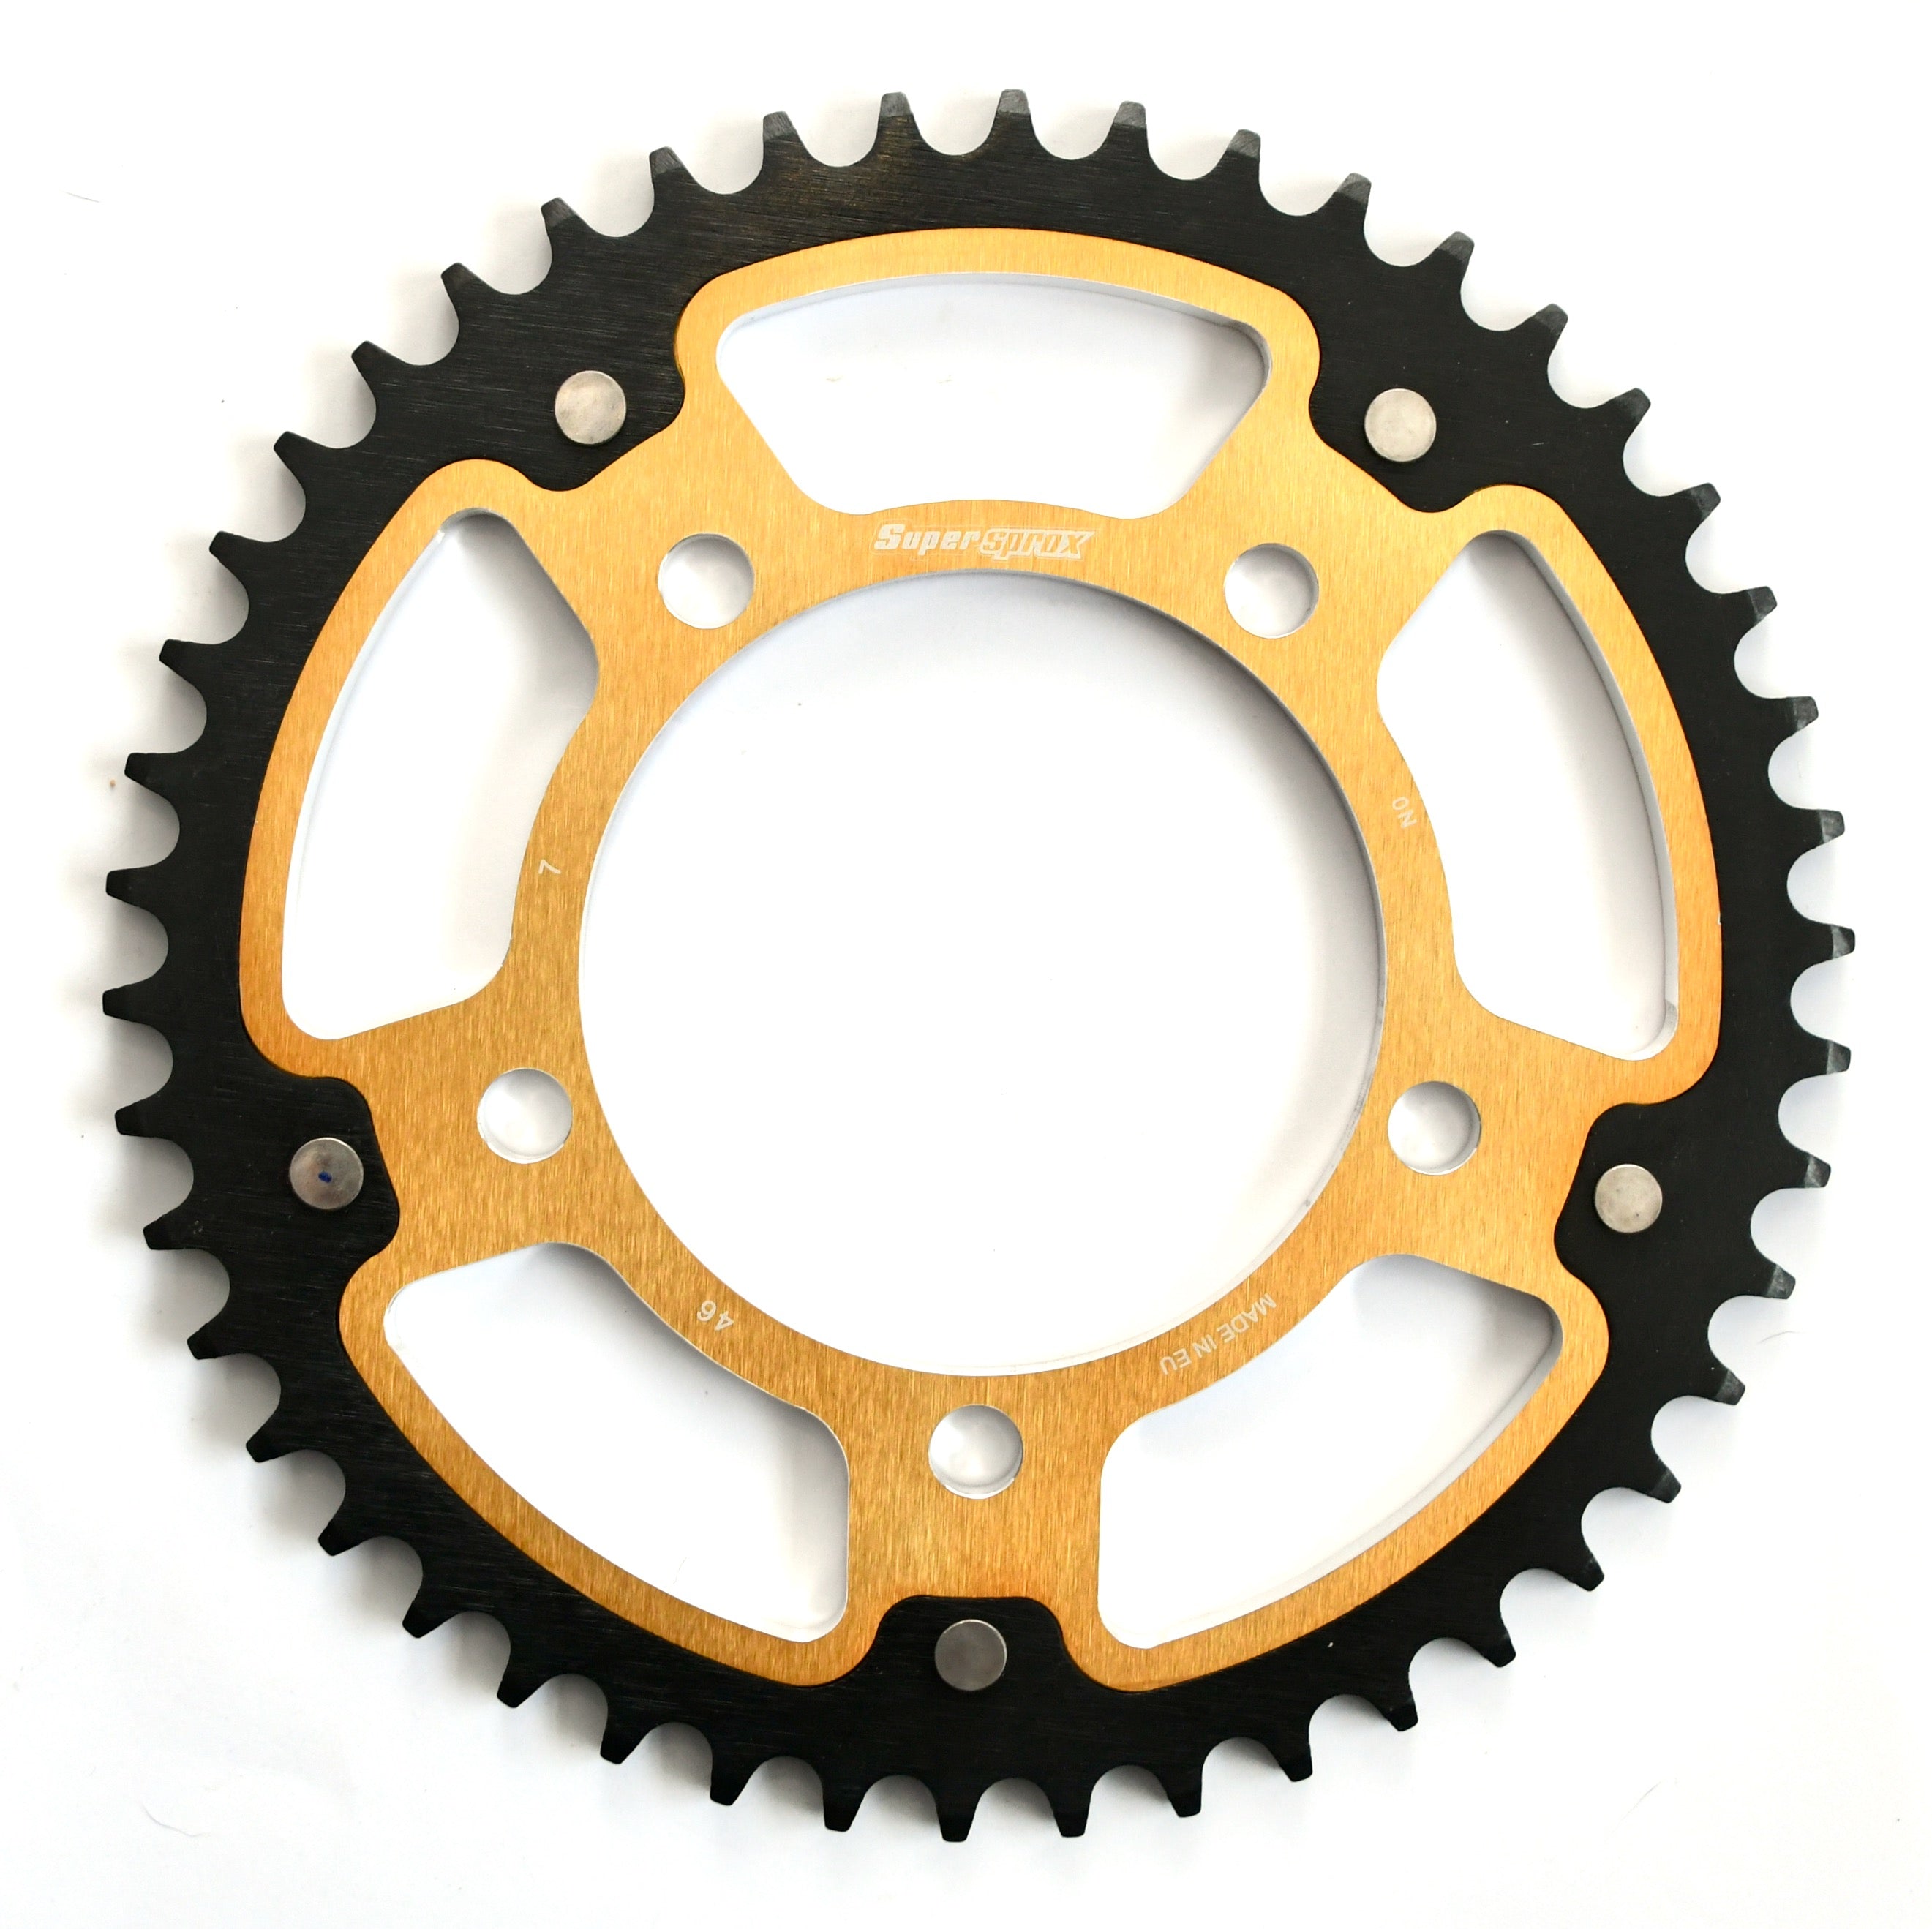 Supersprox Stealth Rear Sprocket RST-7 - Choose Your Gearing